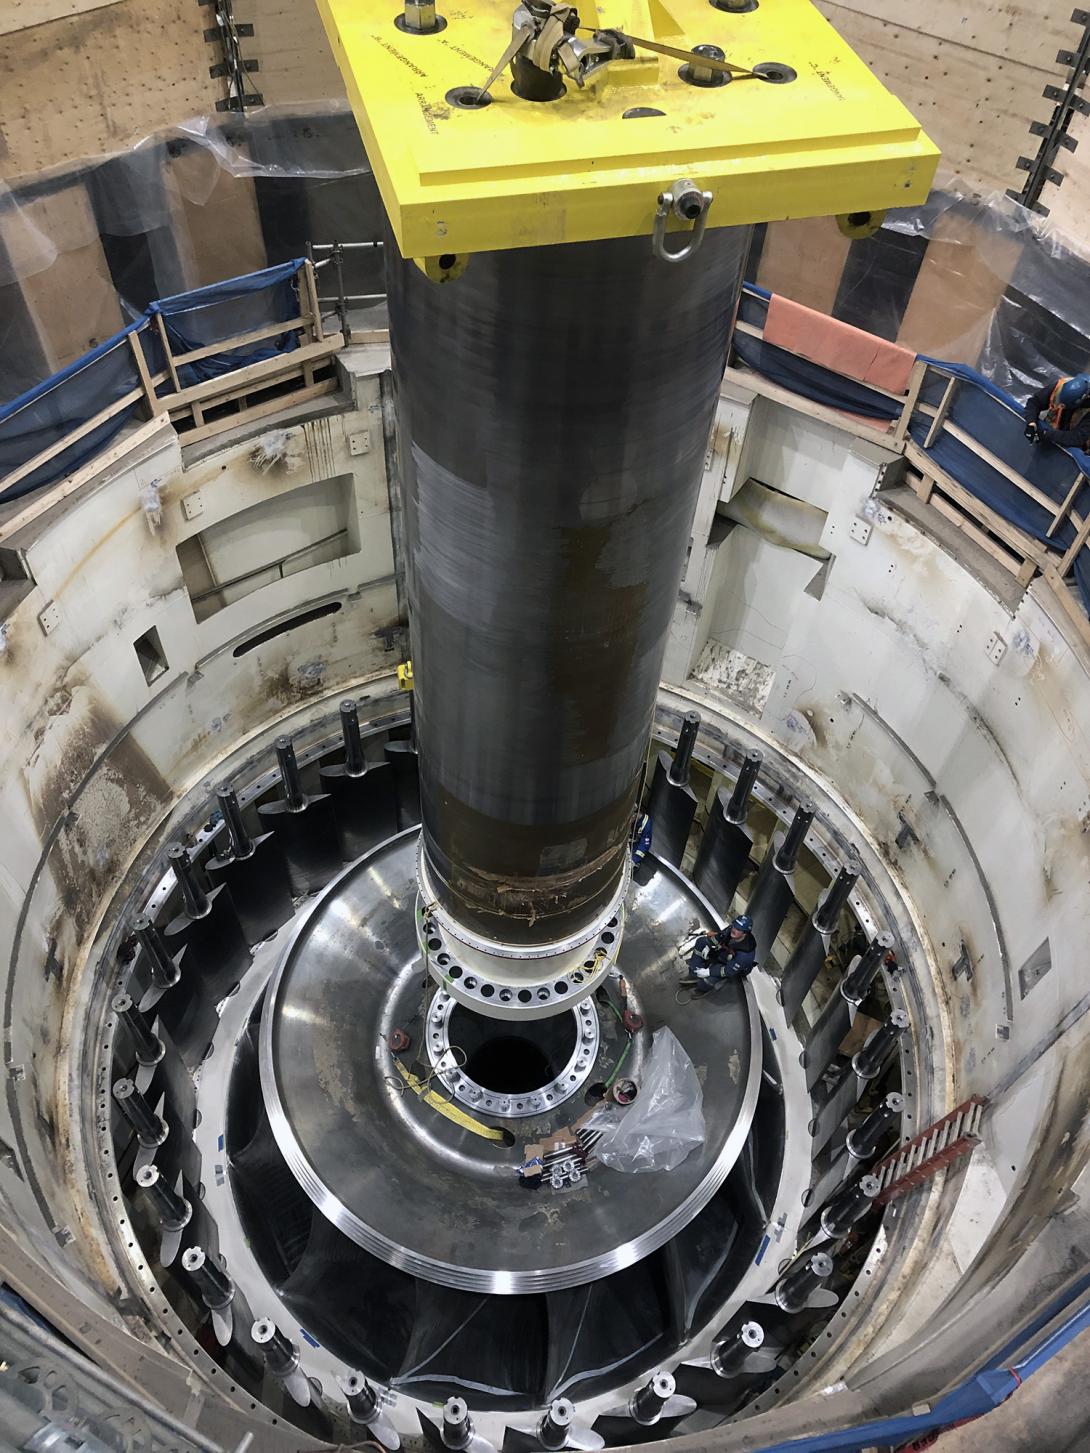 Lowering unit 1 turbine shaft into position in the turbine runner. The shaft connects the turbine to the generator to produce continuous power. | November 2022